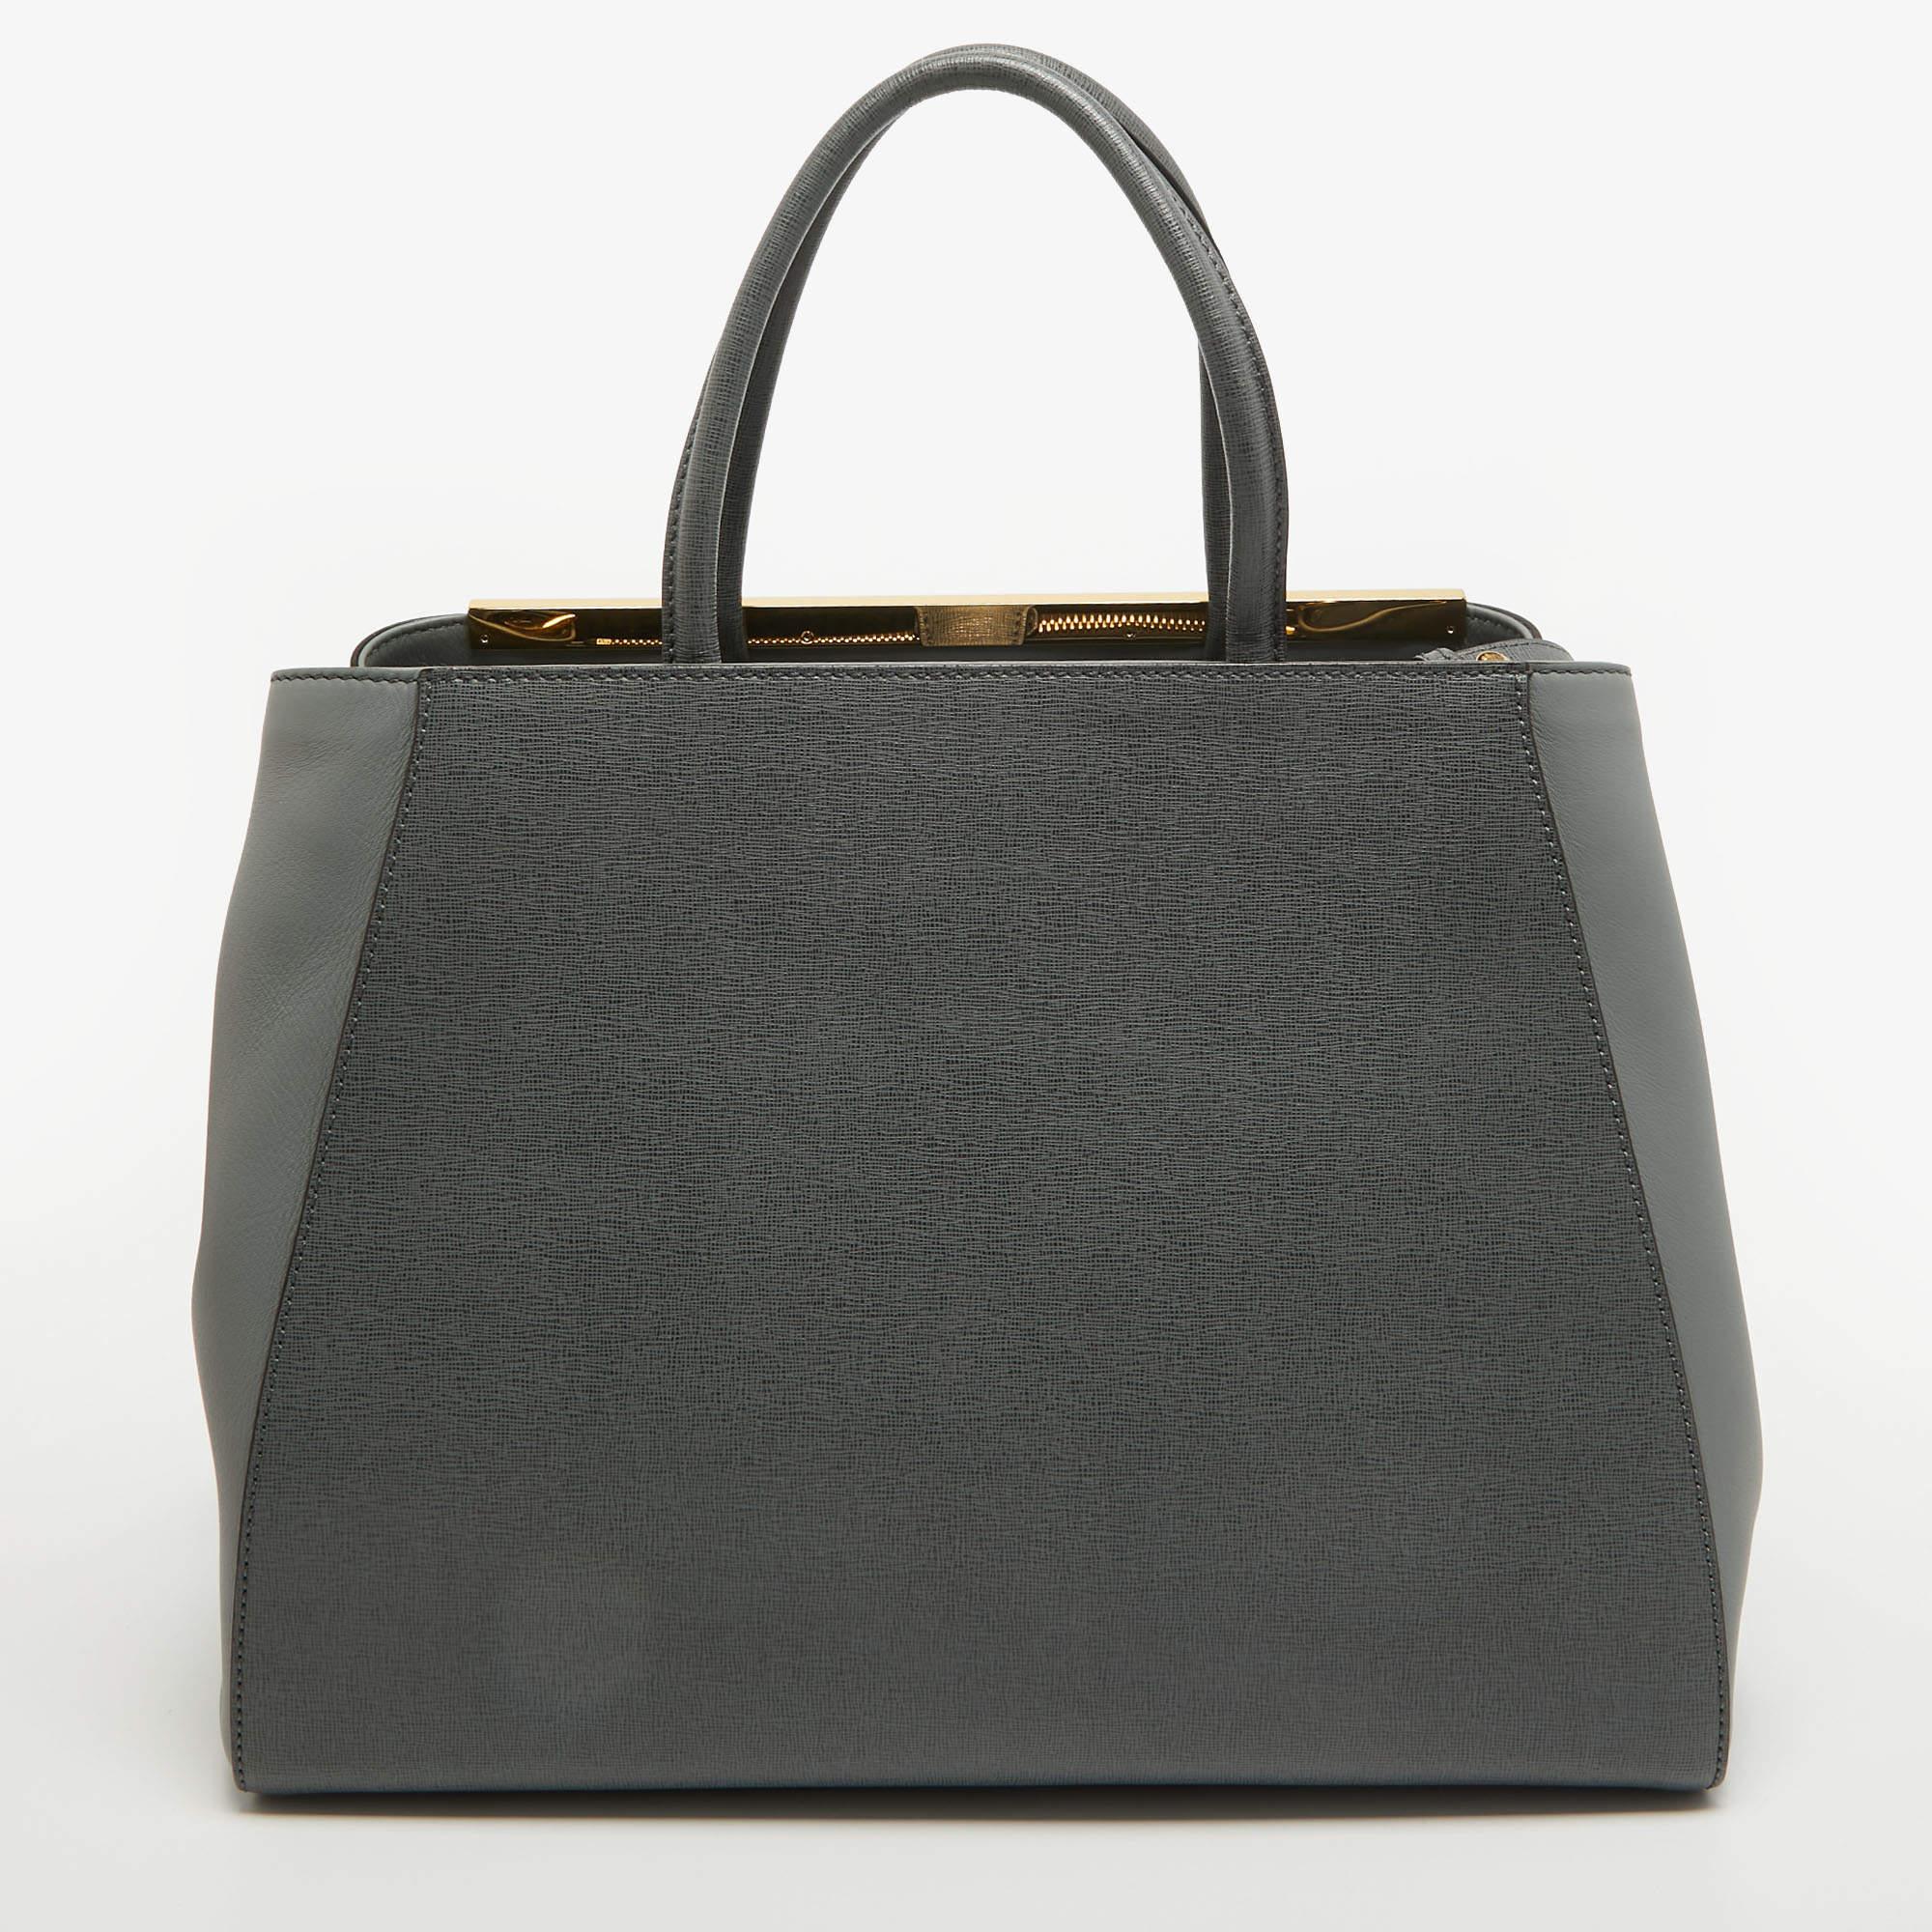 Fendi's 2Jours tote is one of the most iconic designs from the label and it still continues to receive the love of women around the world. Crafted from leather, the bag features double-rolled handles and an optional shoulder strap. It is equipped